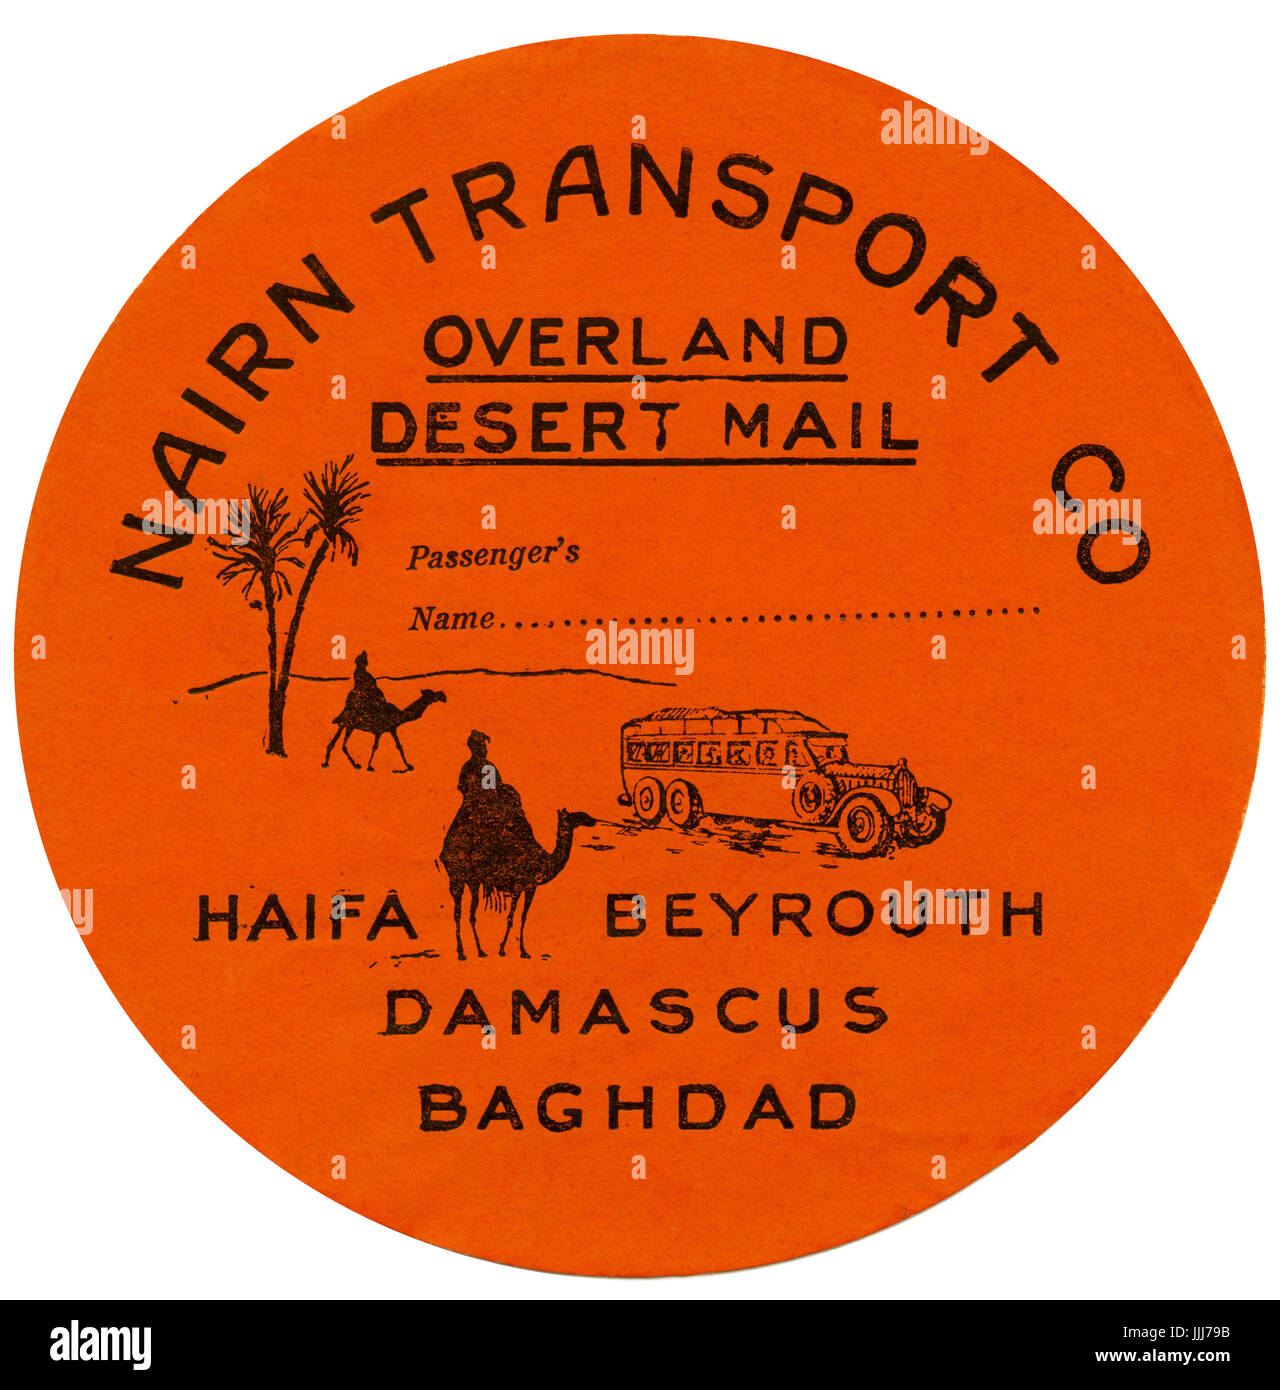 Luggage label -  Nairn Transport Co 'Overland Desert Mail', Haifa, Beyrouth, Damascus and Baghdad. 20th century. Silhouettes of palm trees and figures riding camels, line drawing of a car. Graphic Design. Stock Photo